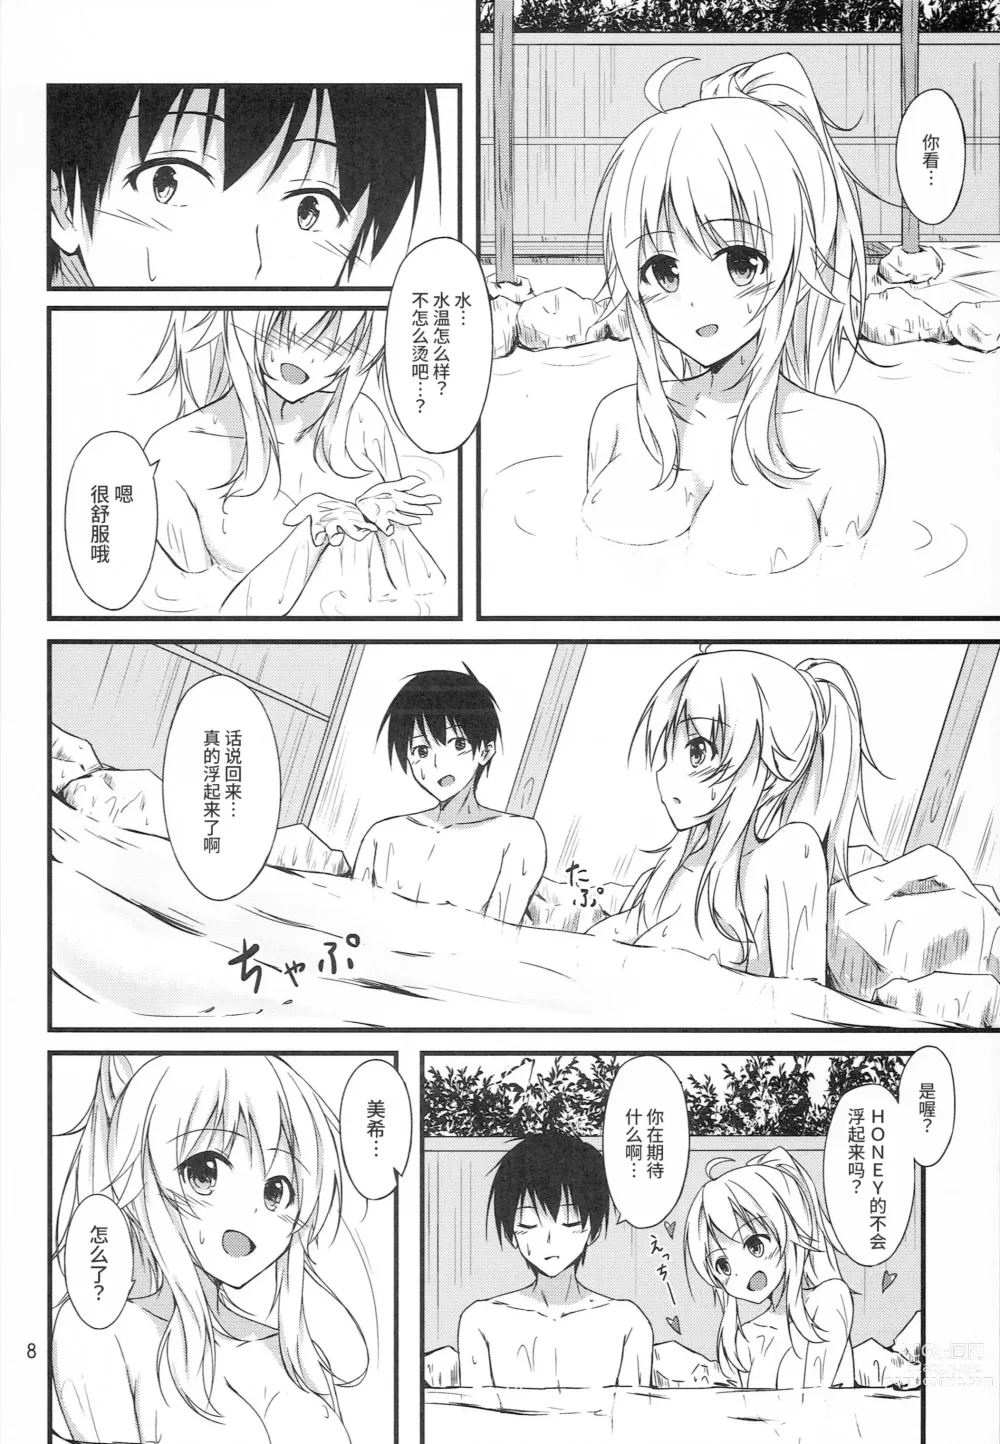 Page 6 of doujinshi Miki to Honey no DeepLove